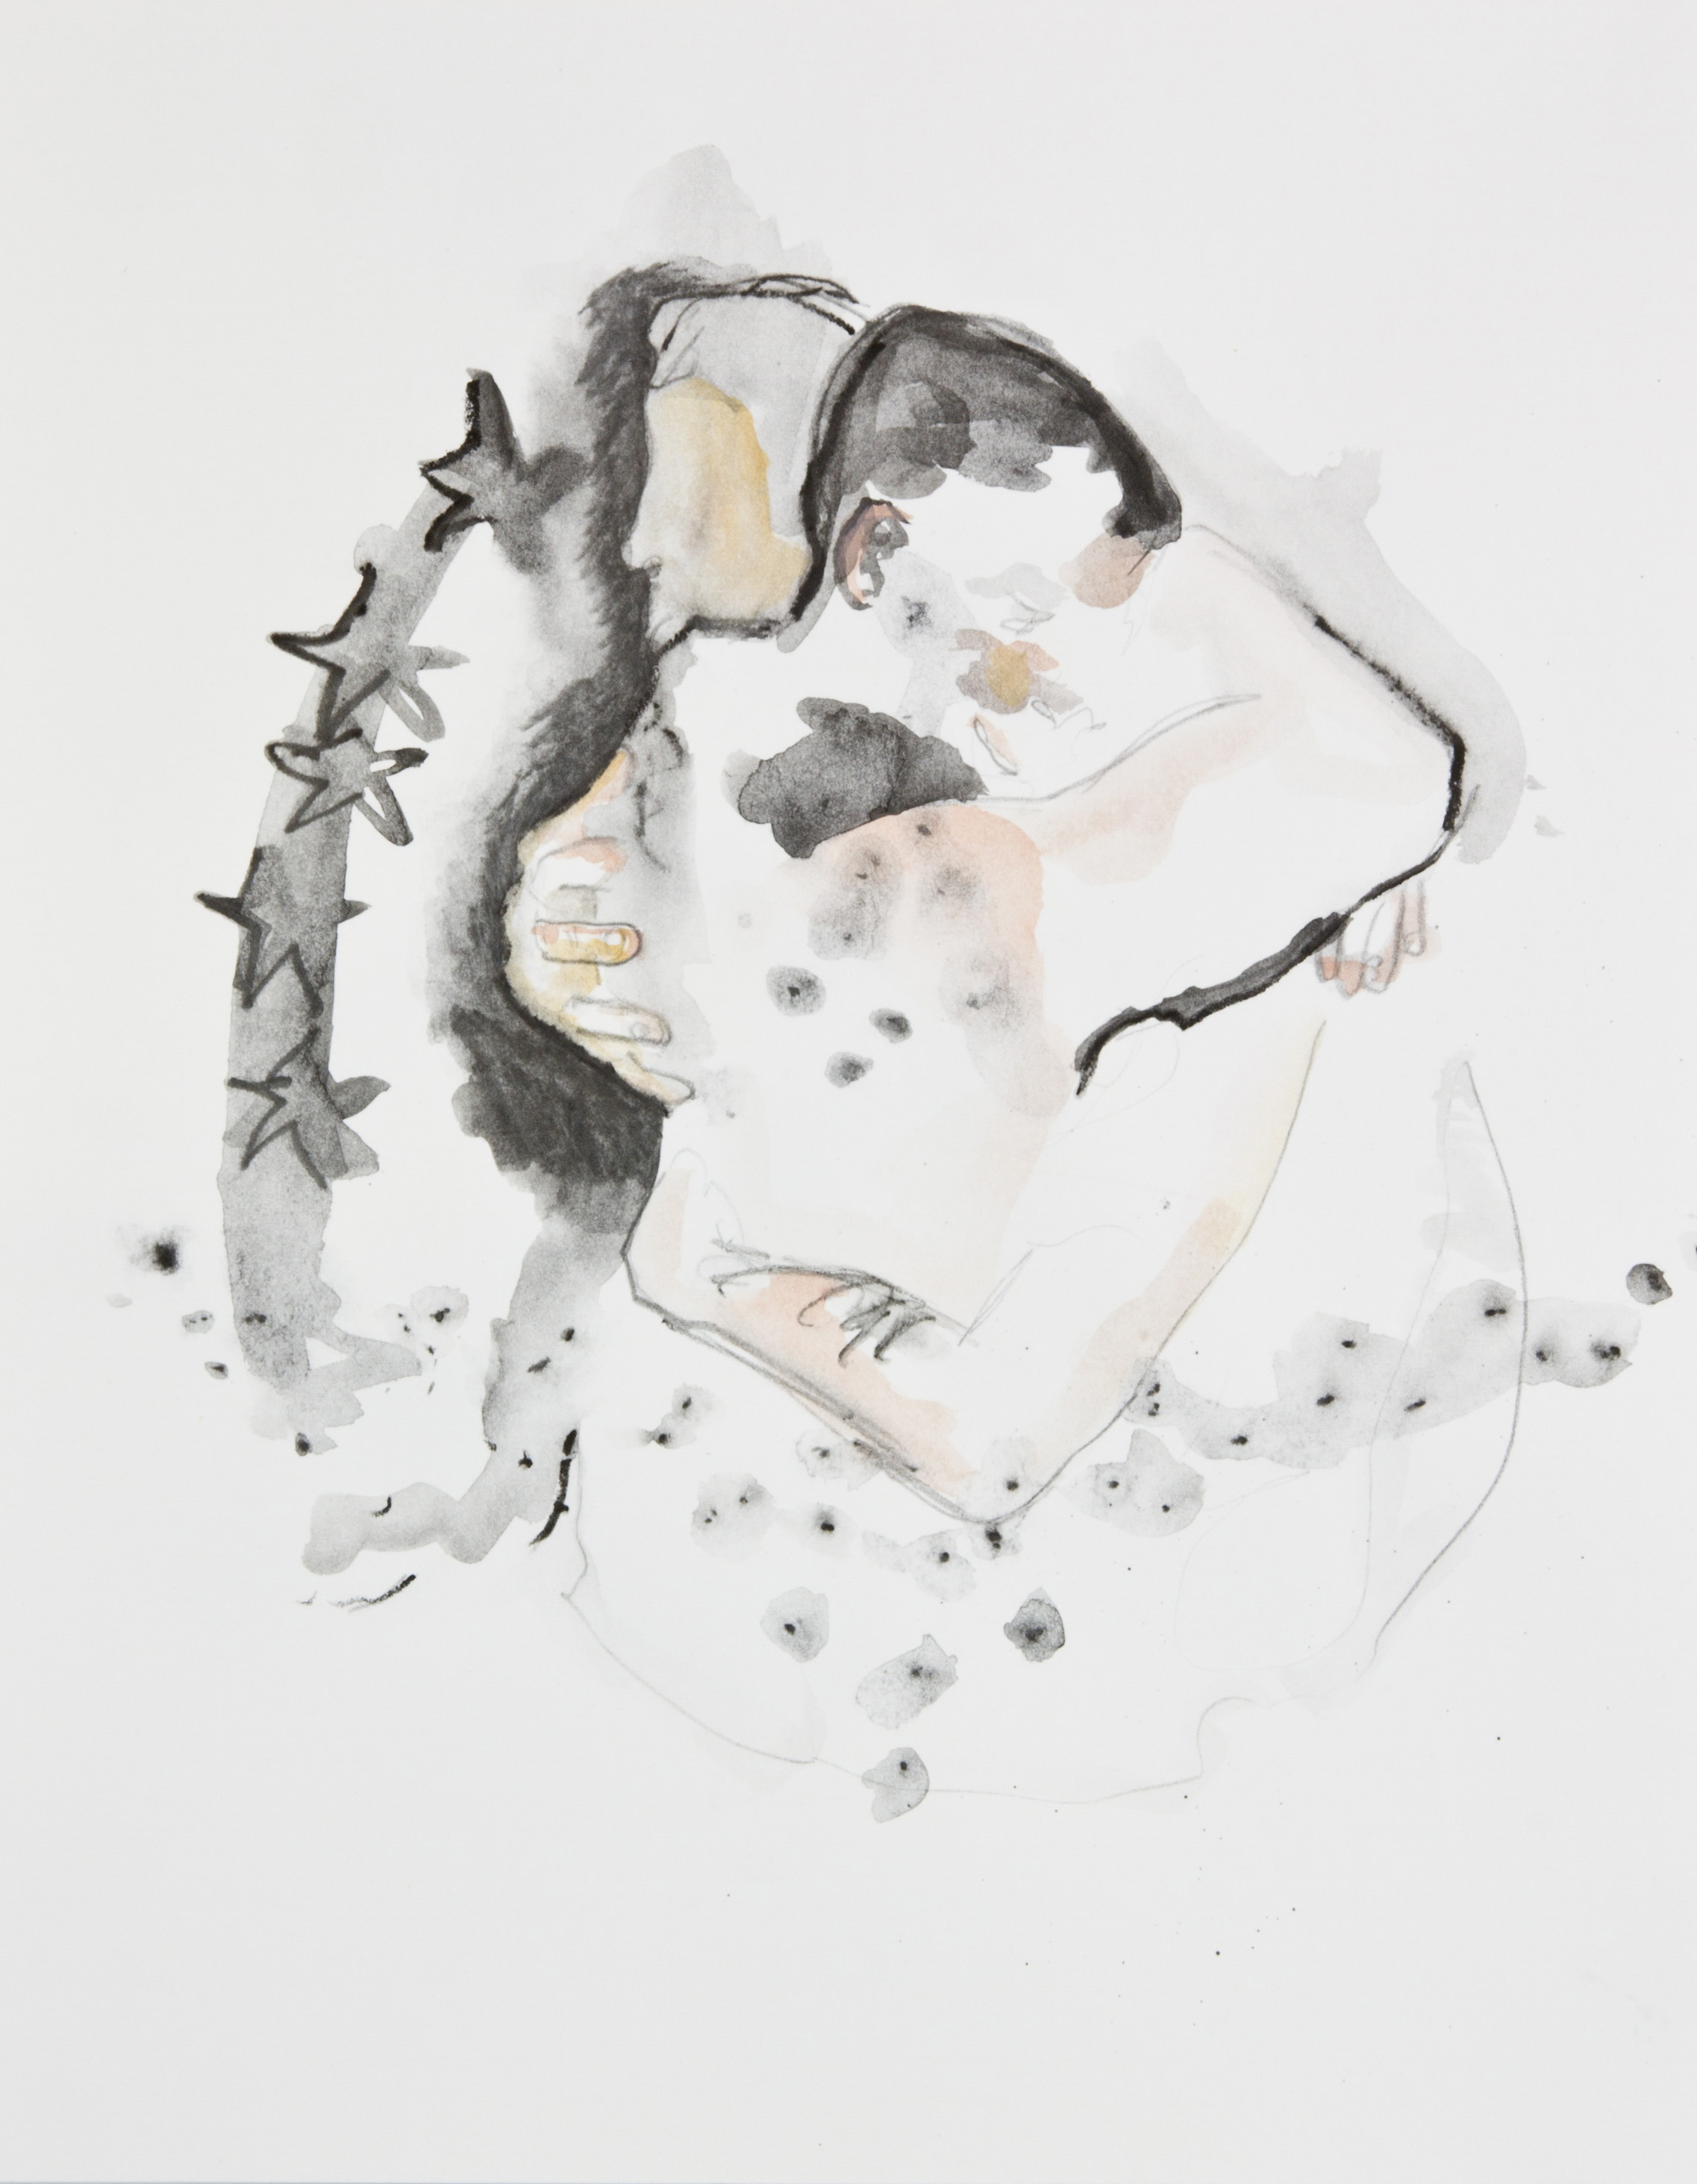 When Stars Collide, 2013, graphite, crayon and watercolor pencil on paper, 11x14 inches